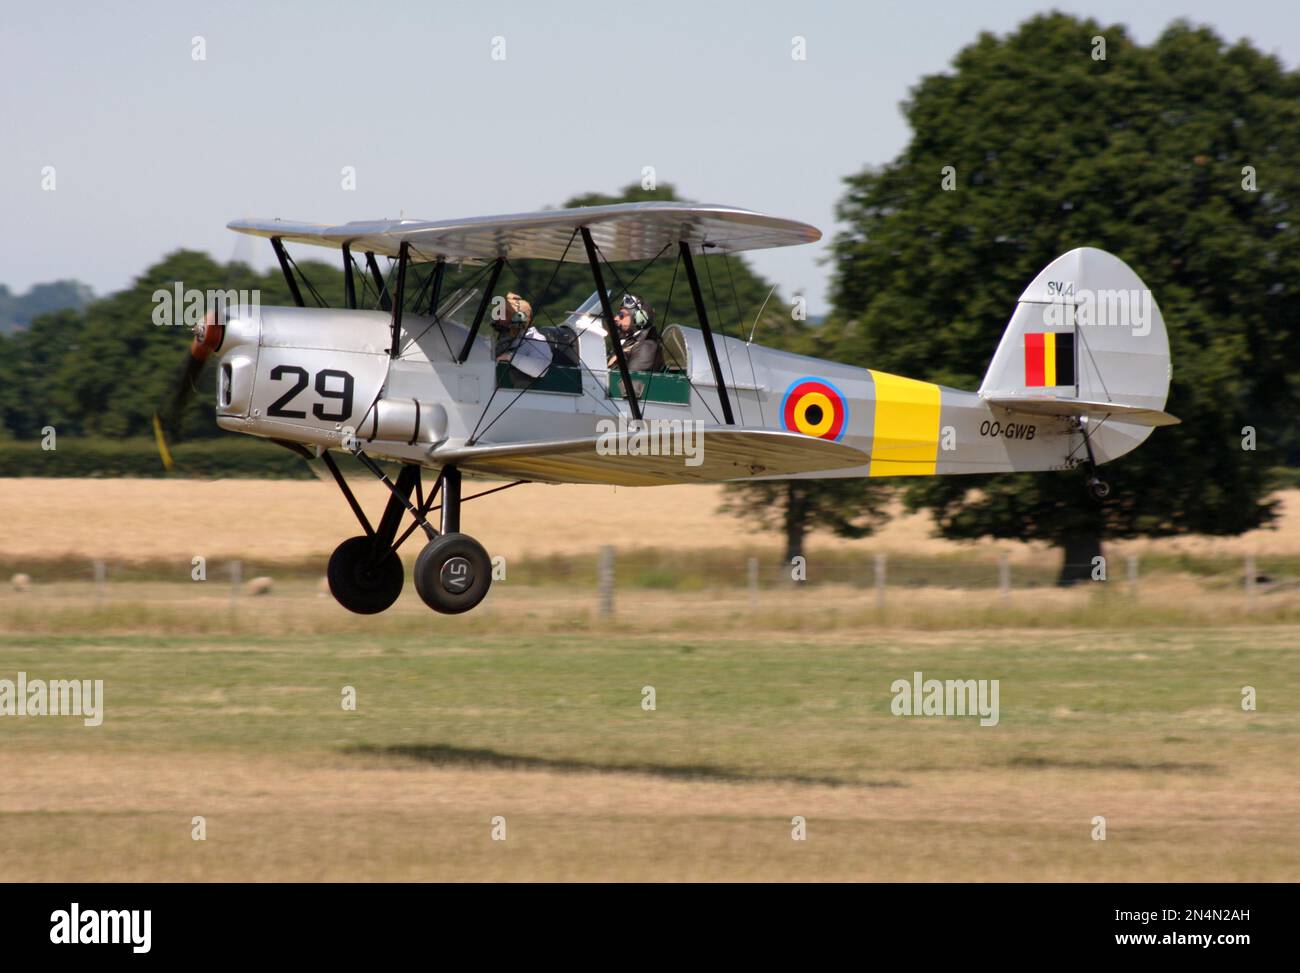 A Stampe and Vertongen SV-4 Belgian made biplane in action at Headcorn airfield Kent England Stock Photo